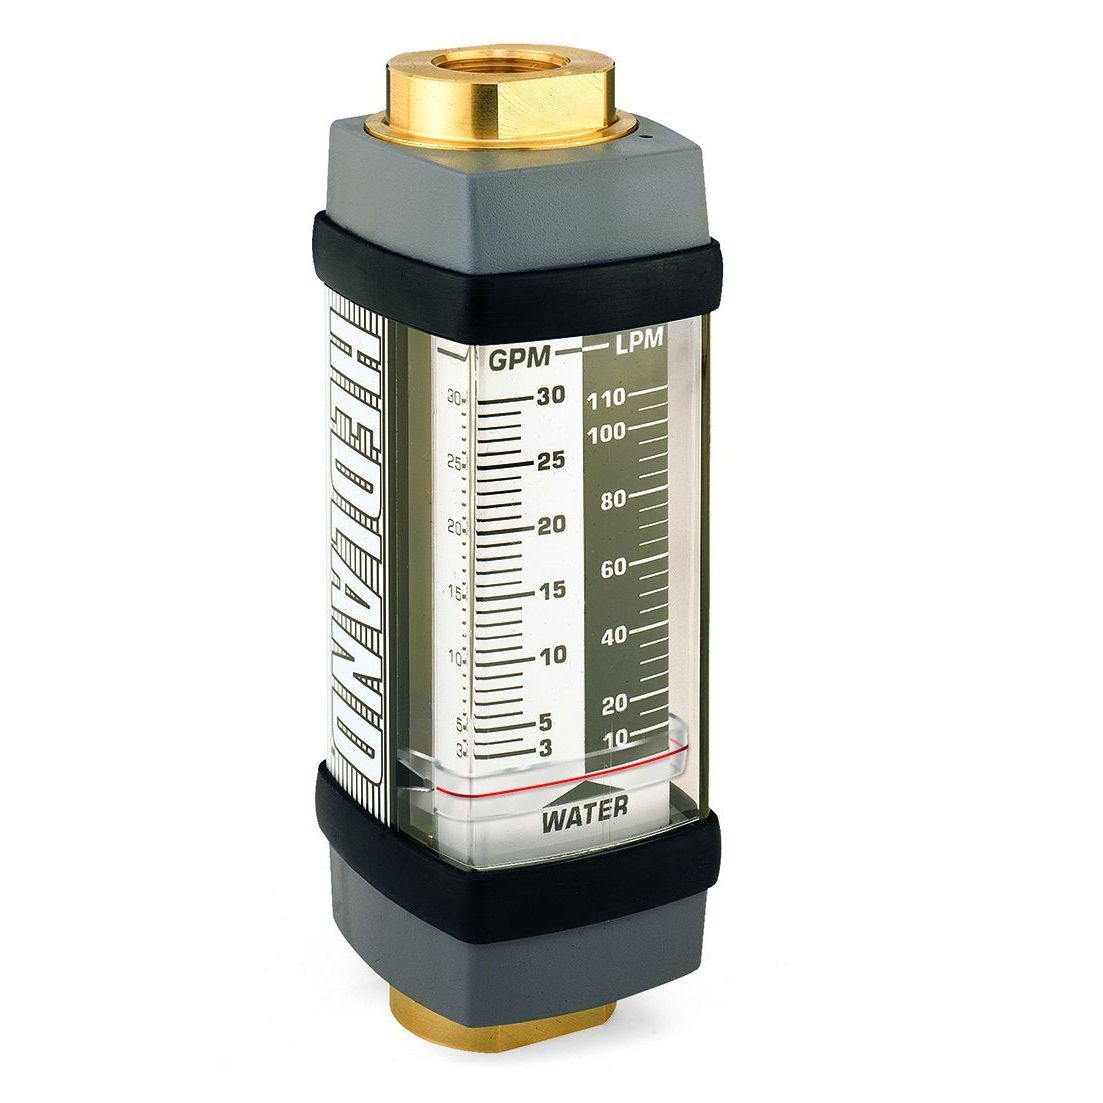 H854B-050 : Hedland 3500psi Brass Flow Meter for Water, #20 SAE (1.25), 5 to 50 GPM